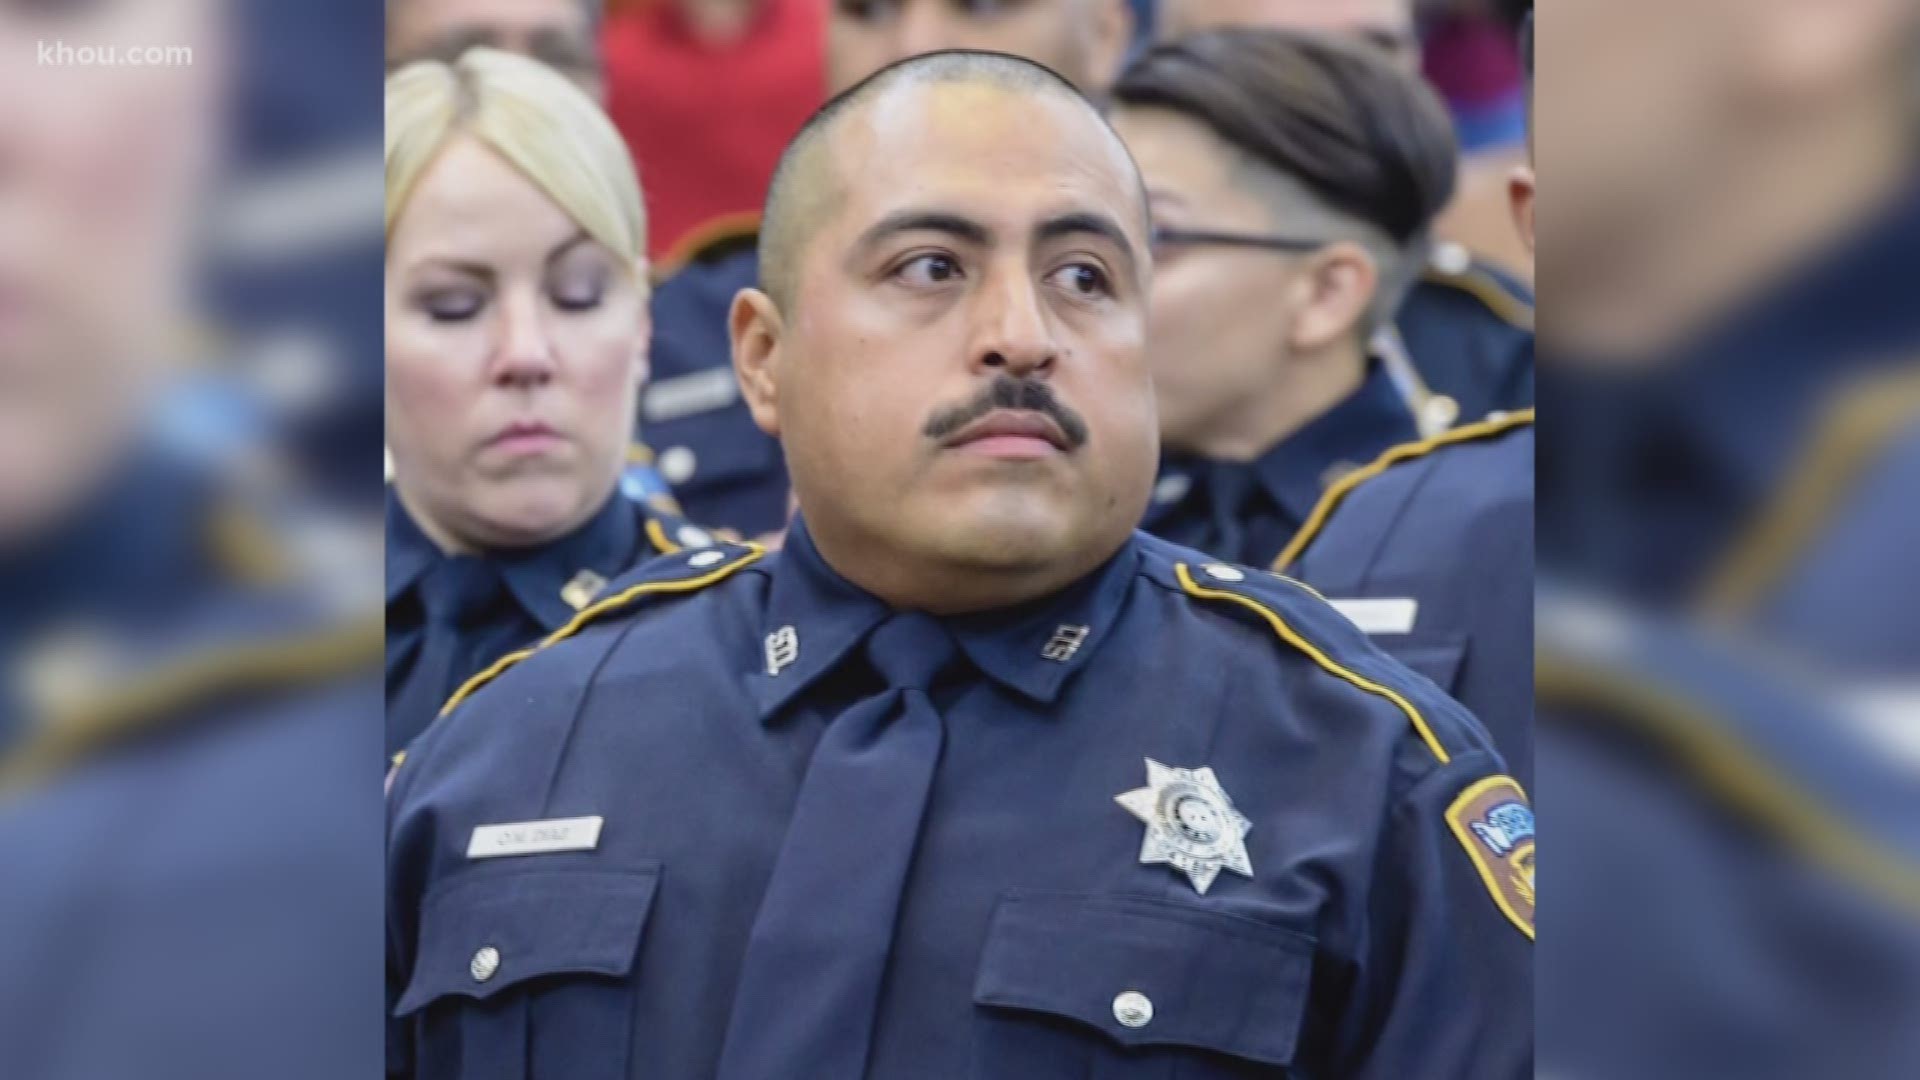 The tragic, unexpected death of Harris County Sheriff's Deputy Omar Diaz has struck home for law enforcement all over Houston.